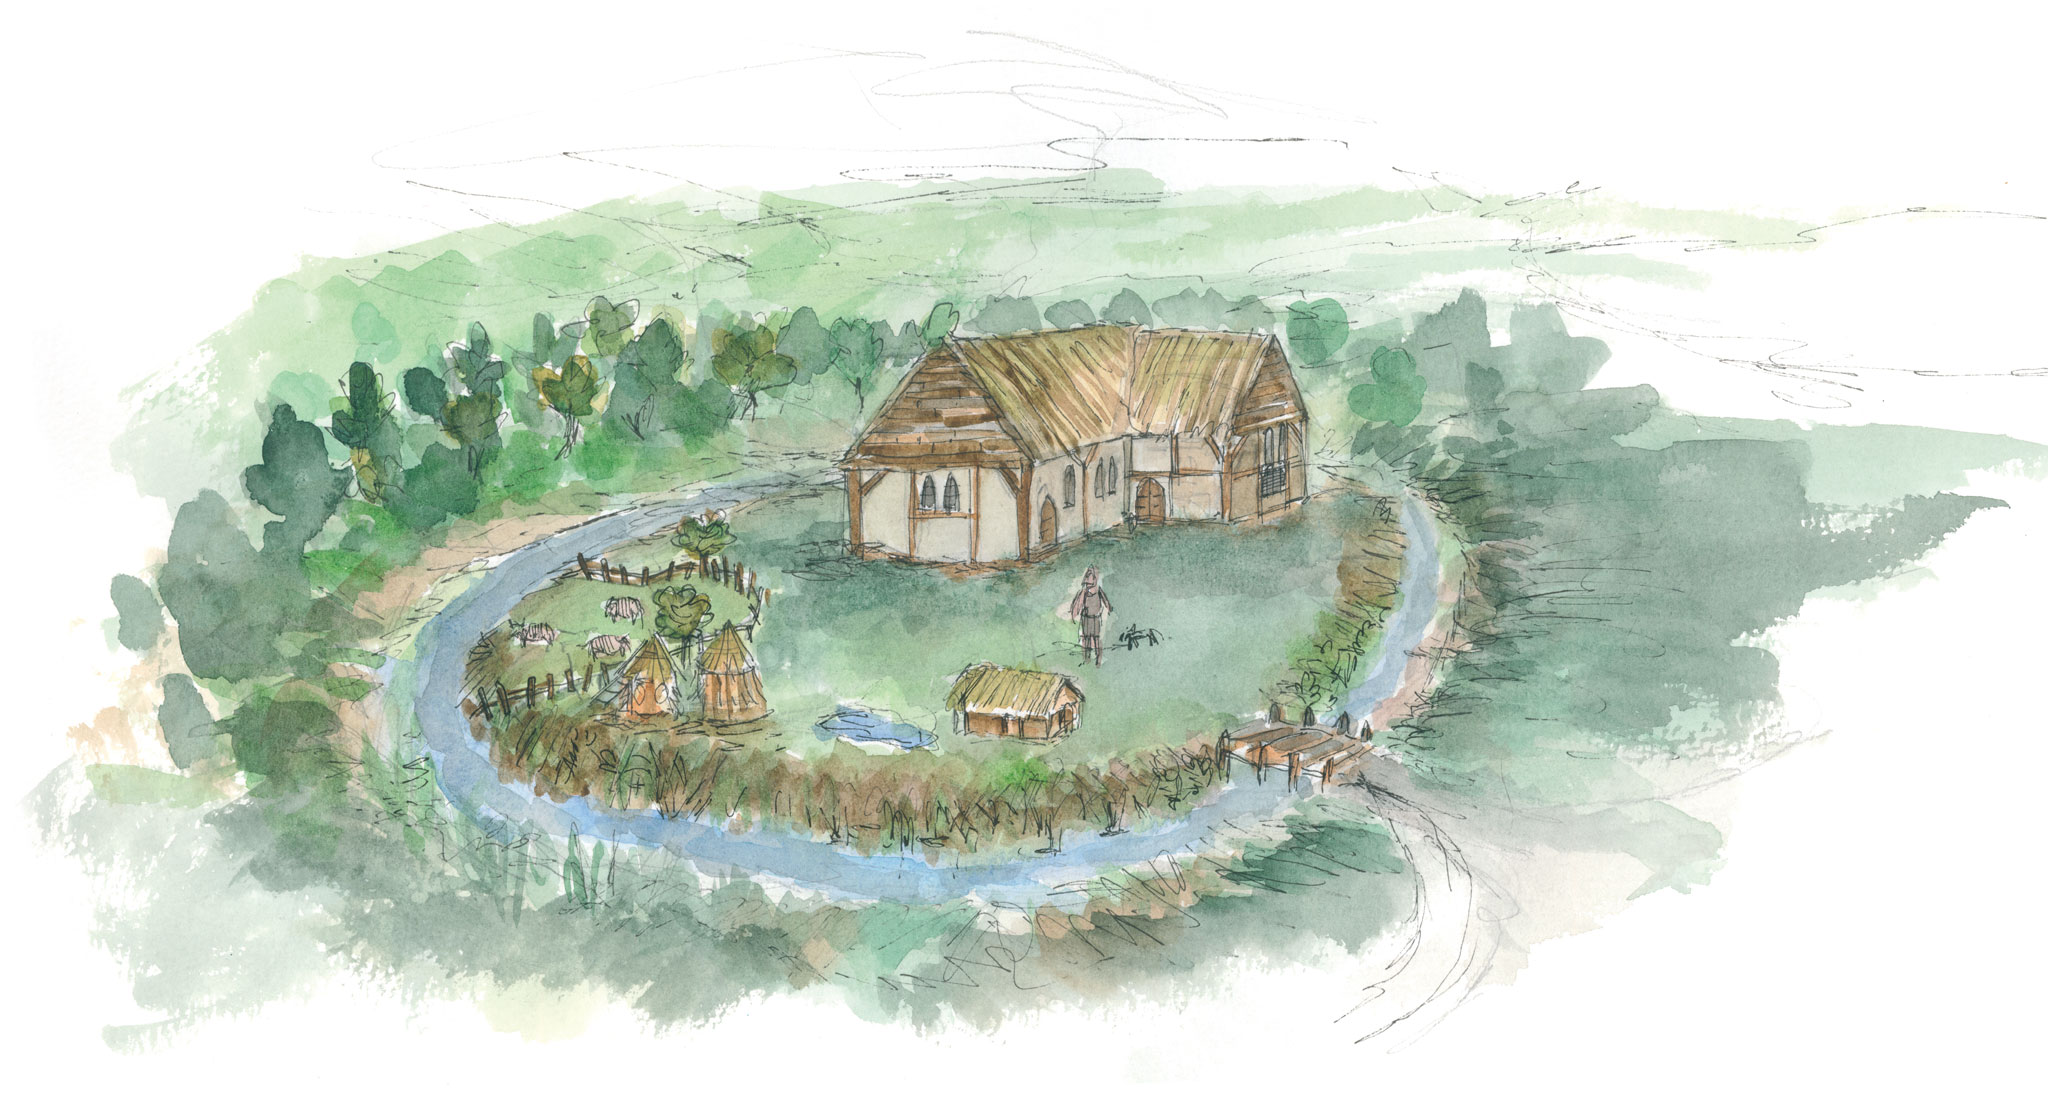 Painting of how the medieval moated site might have looked